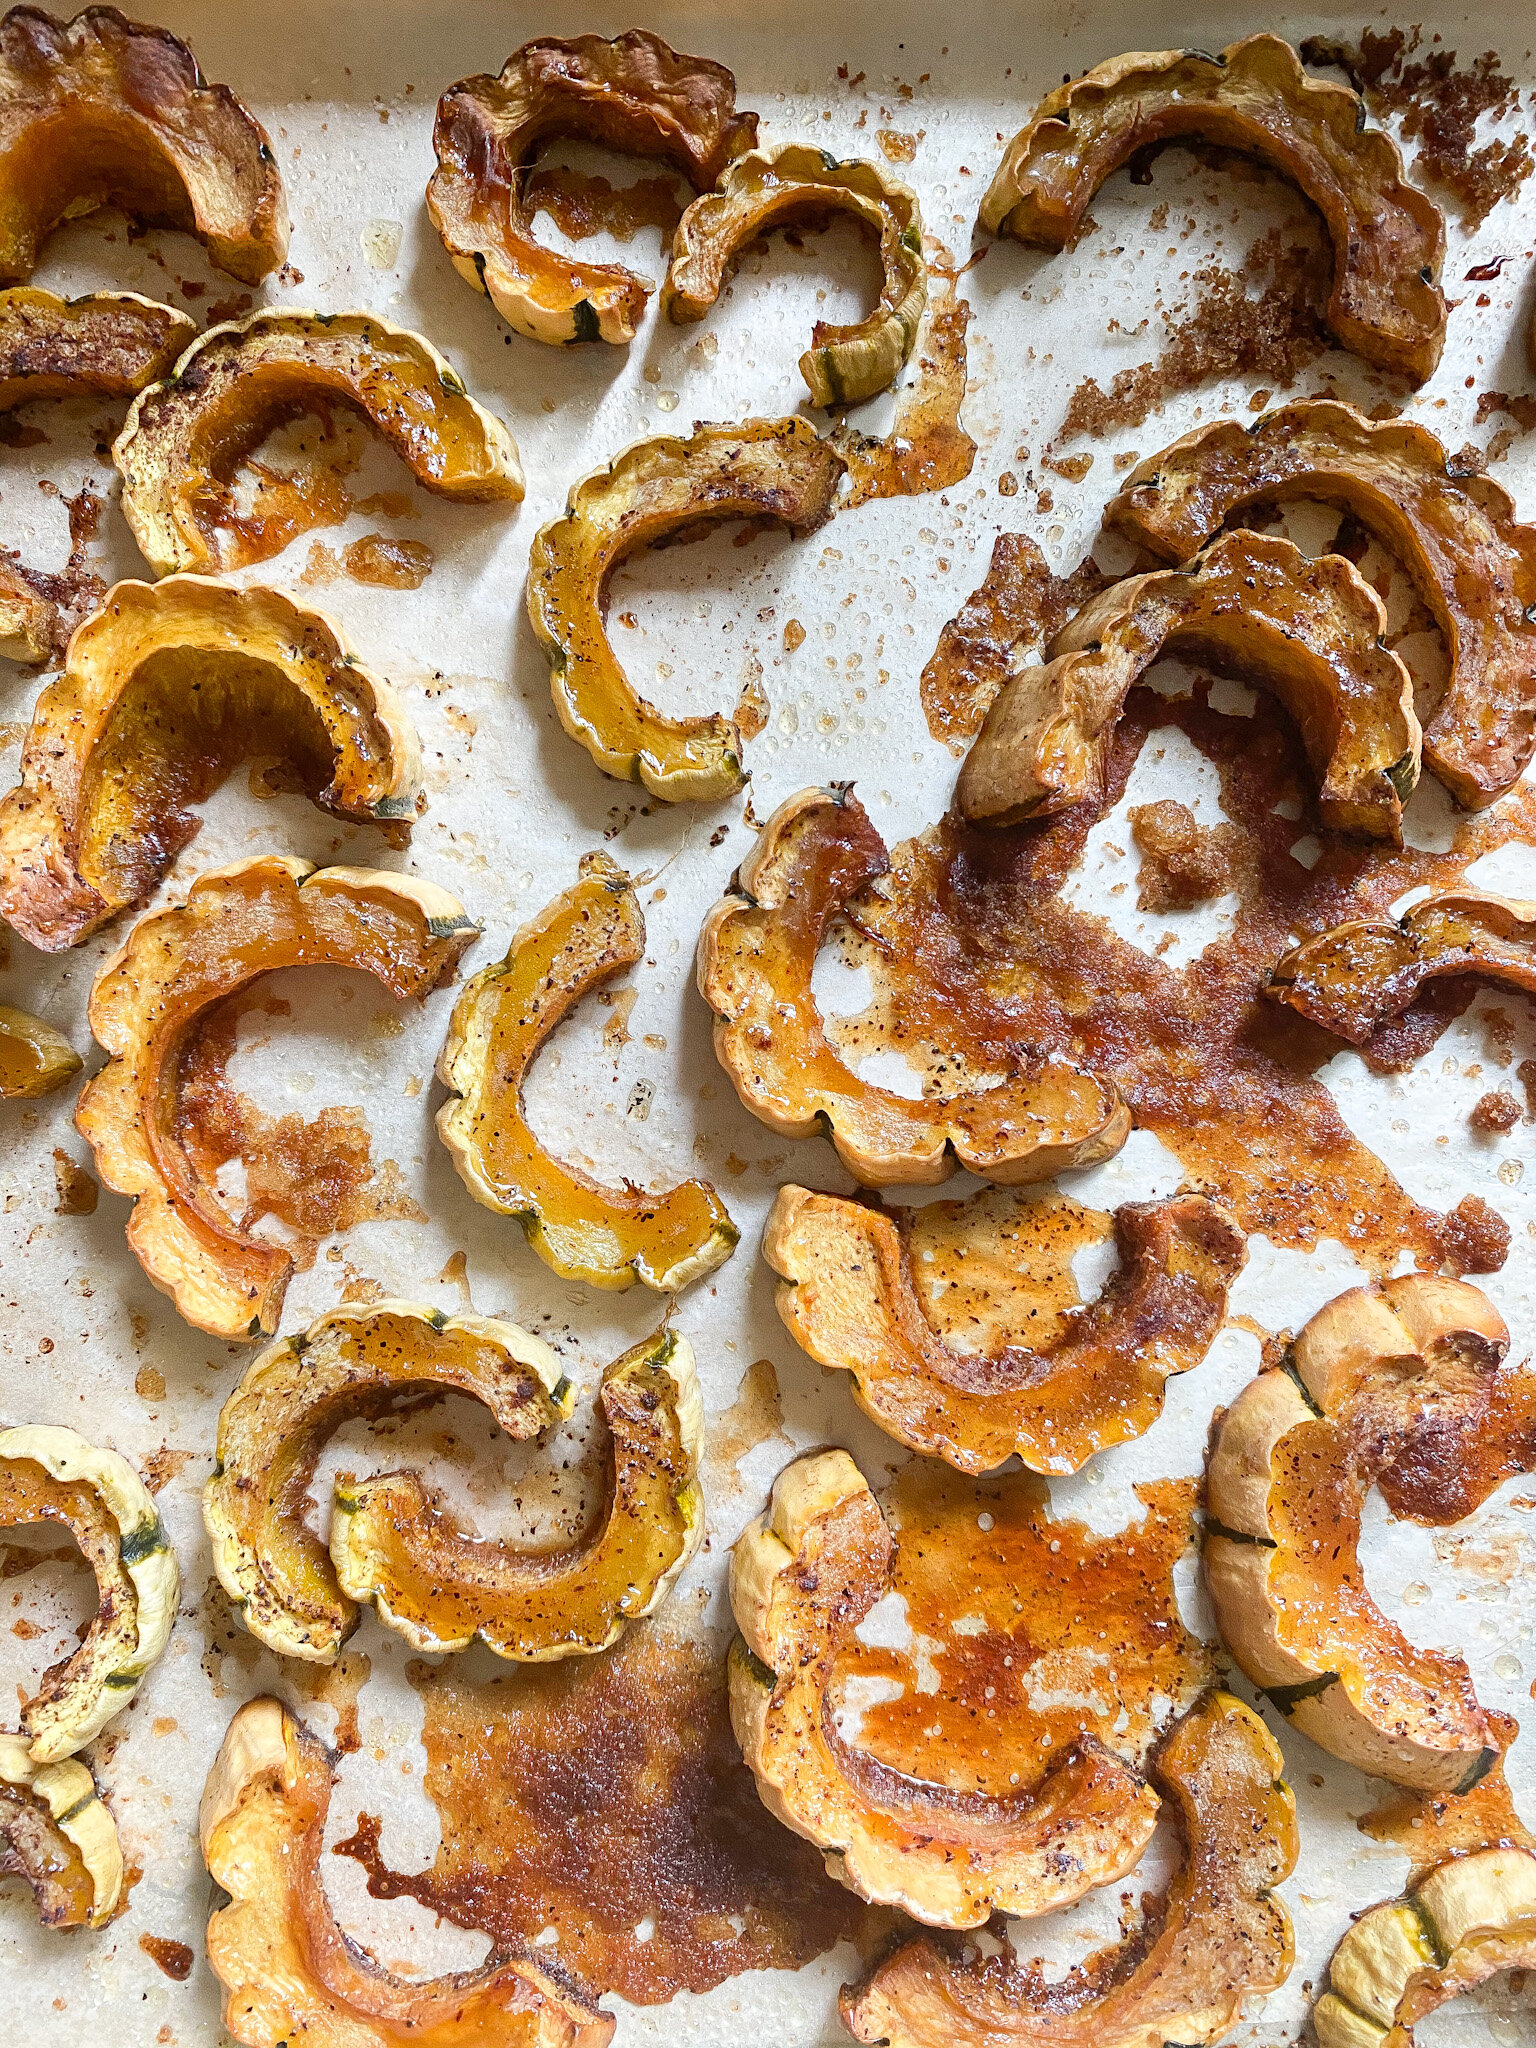 A rimmed baking sheet shows freshly roasted delicata squash tossed in a maple glaze.